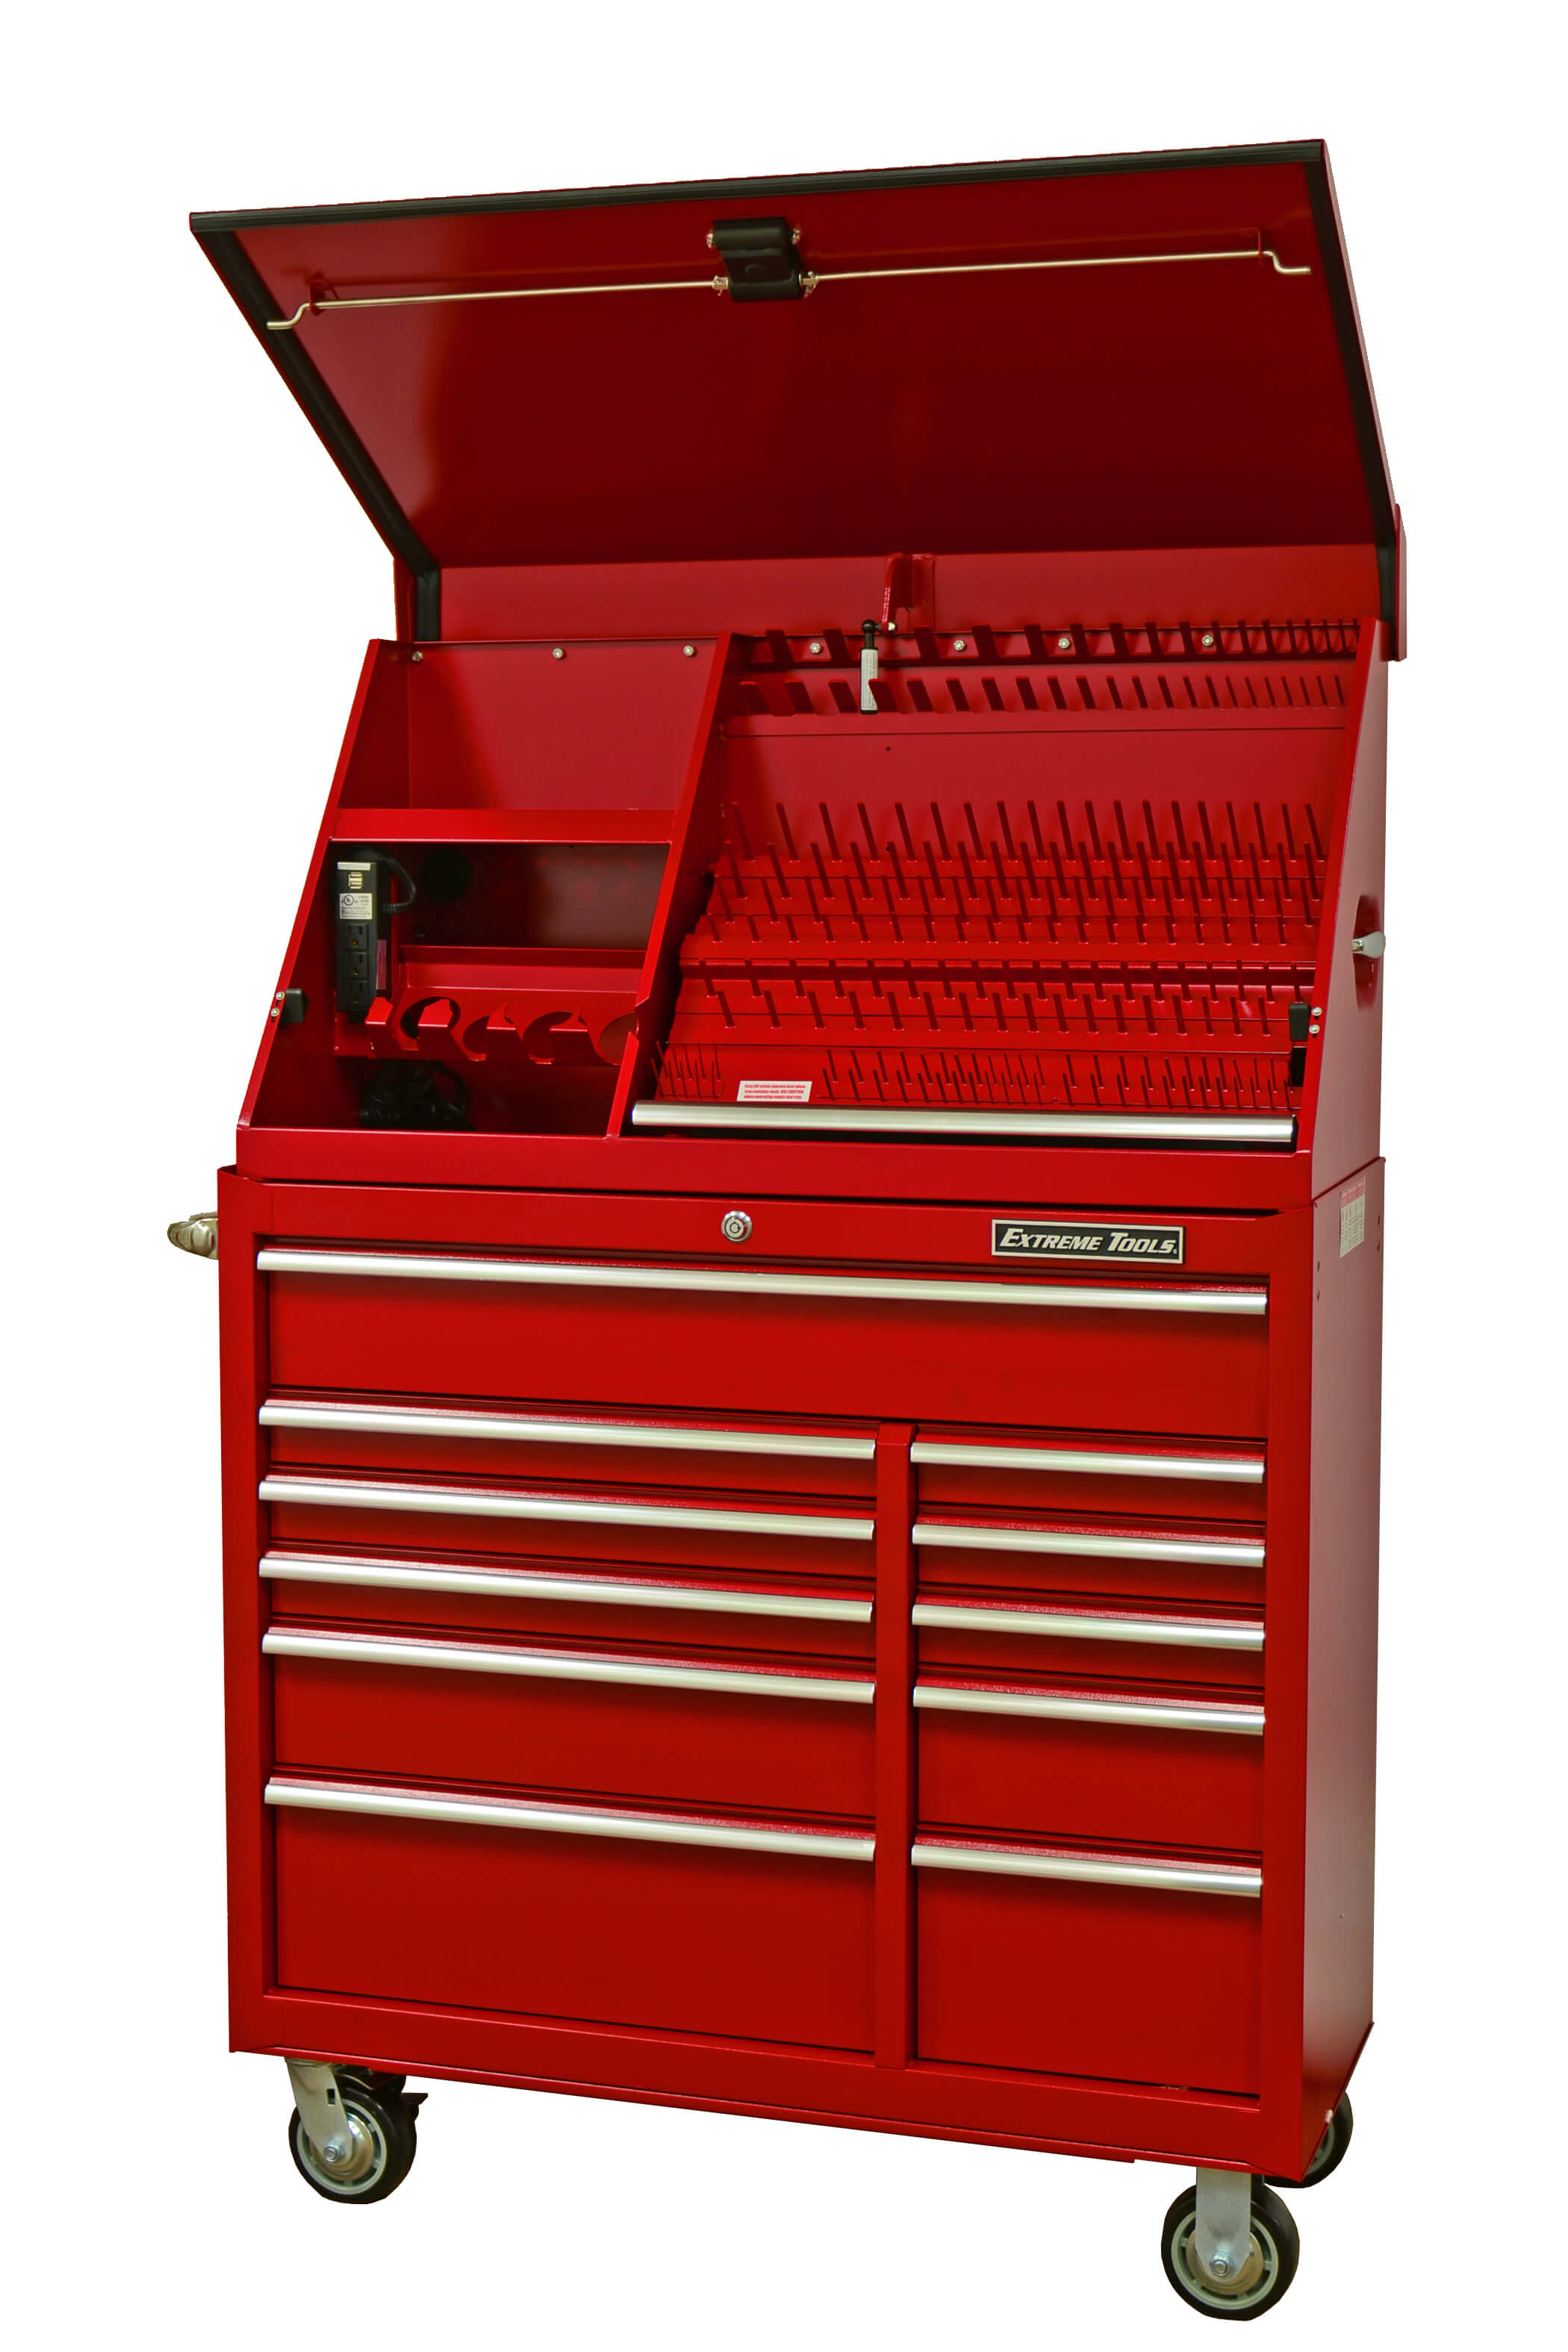 Extreme Tools® 41 inch Deluxe Extreme Portable Workstation®/11 Drawer 24 inch Deep Roller Cabinet Combo